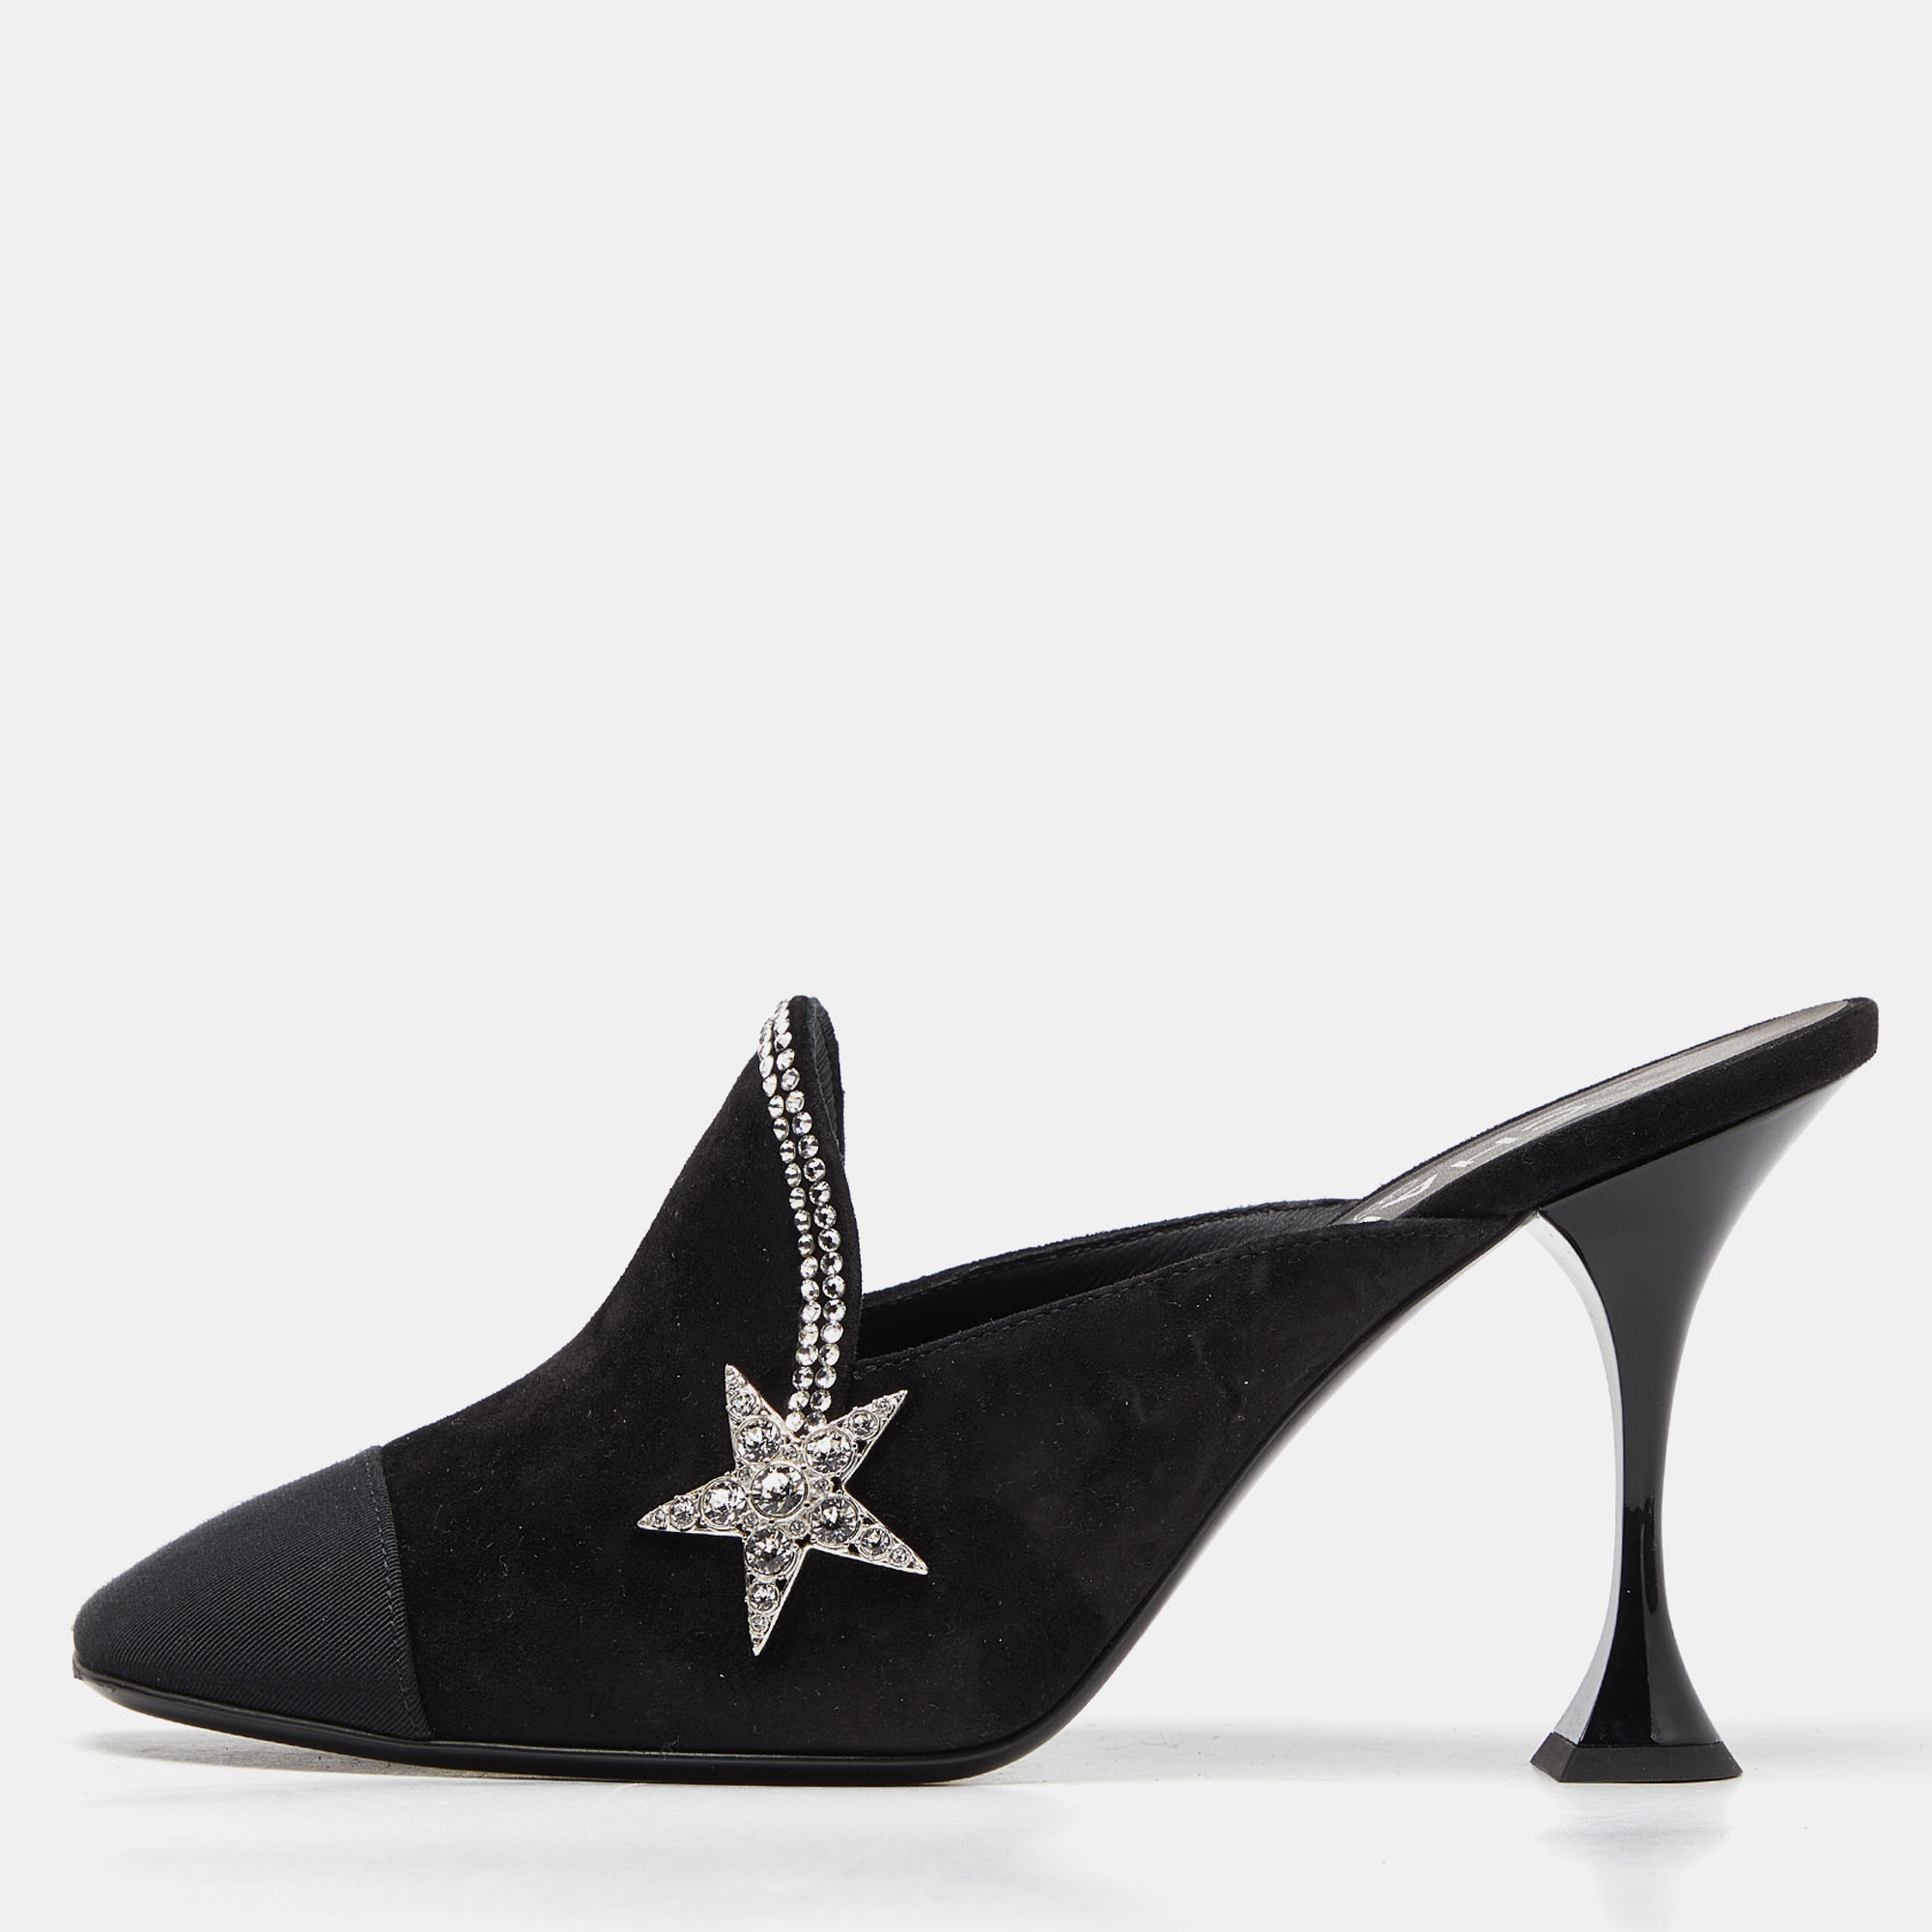 Chanel Black Suede and Grosgrain Crystal Star Mules Size 38